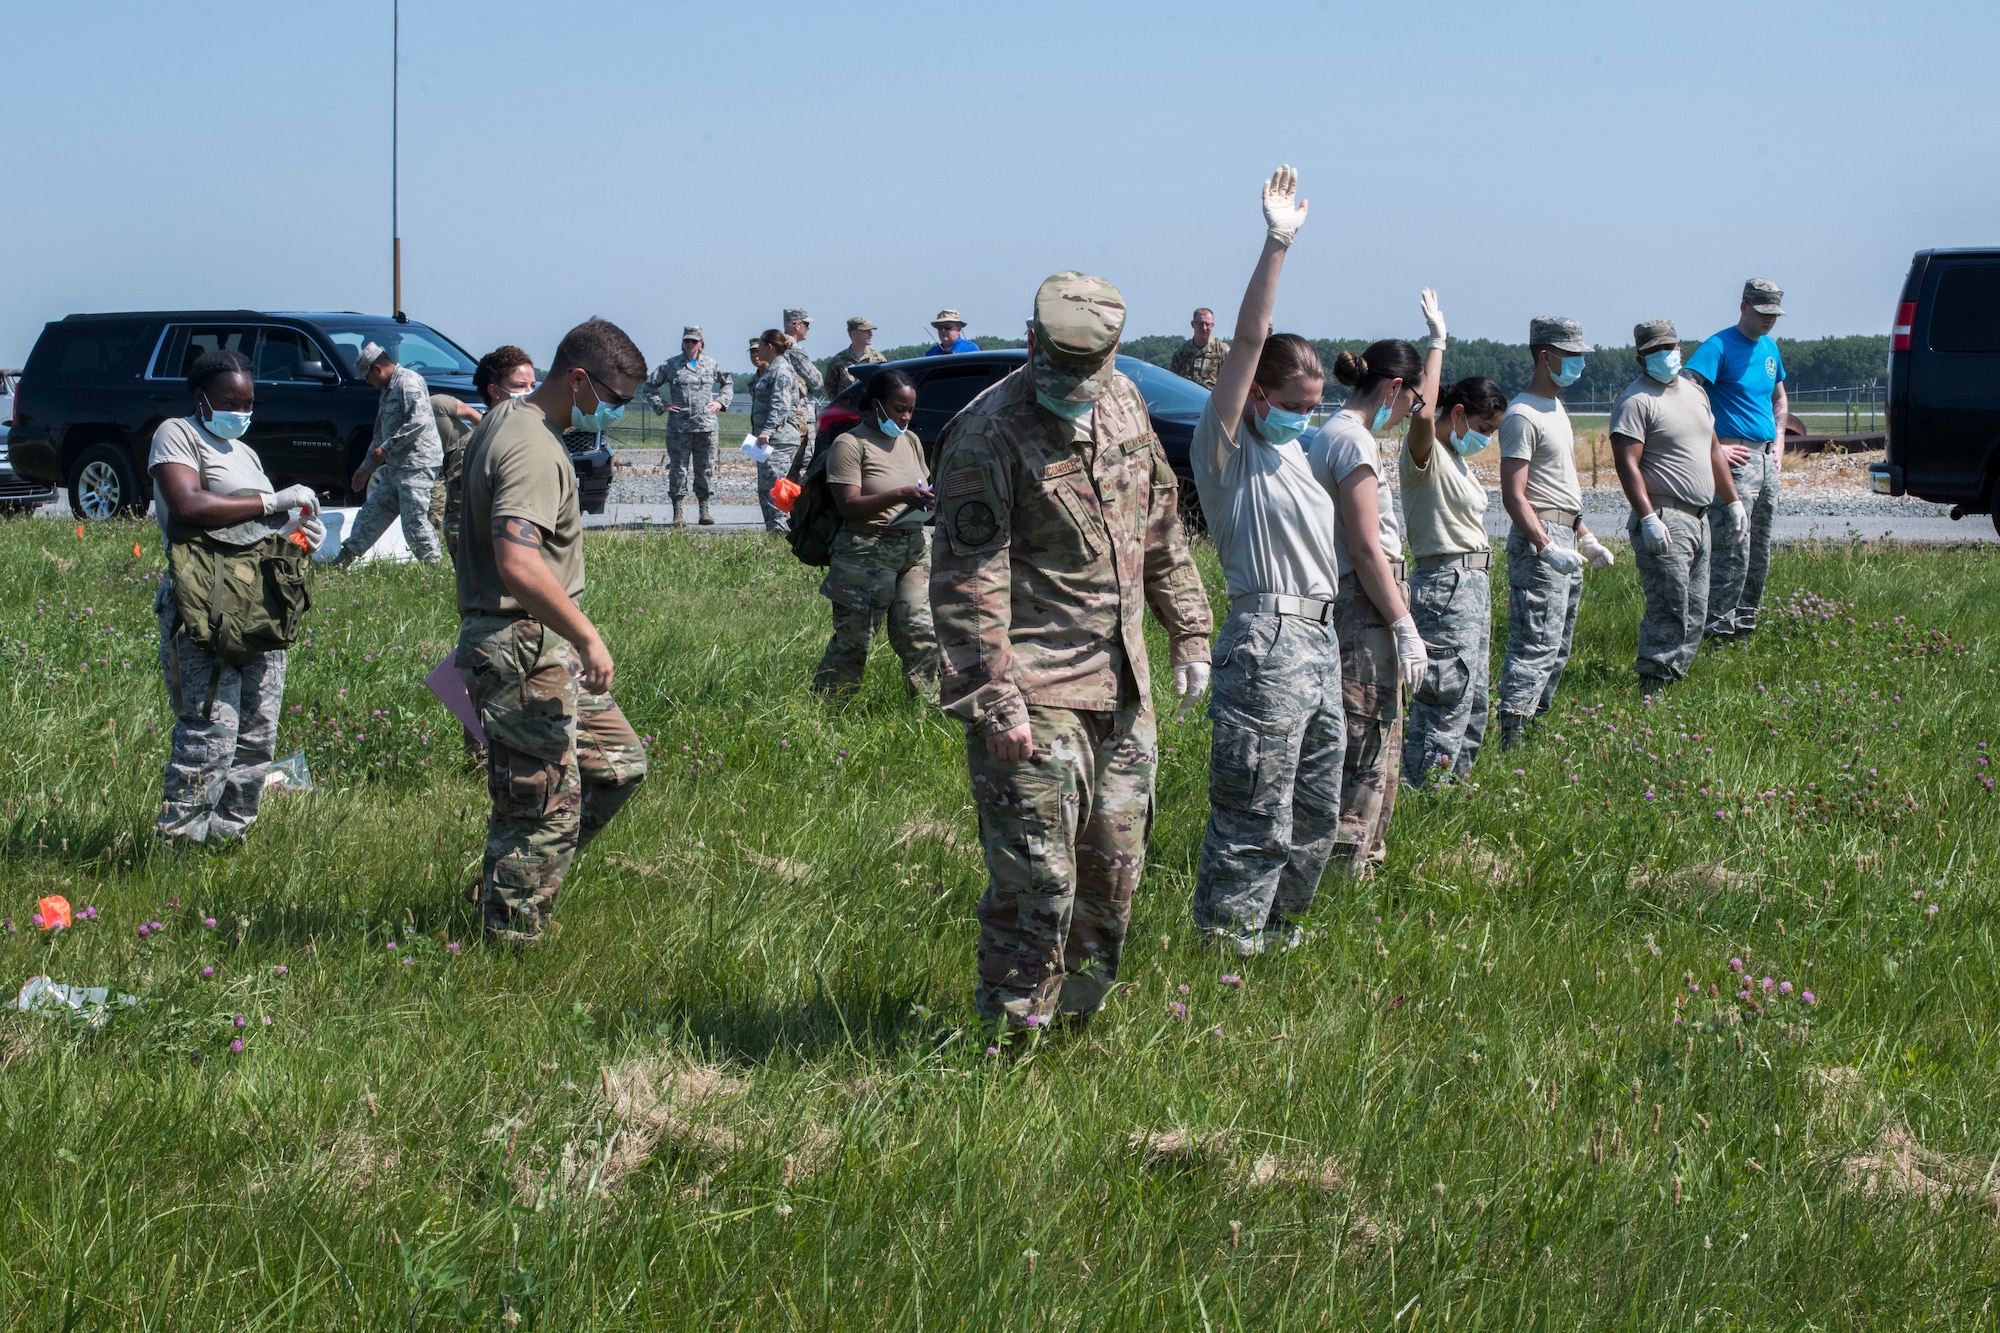 Airmen from the 436th Force Support Squadron conduct a search during a search-and-recovery exercise June 28, 2019, at Dover Air Force Base, Del. The team swept the field in a horizontal line – arm’s length apart, step by step – to ensure nothing was missed. A team member would raise a hand when an item was located. (U.S. Air Force photo by Senior Airman Christopher Quail)